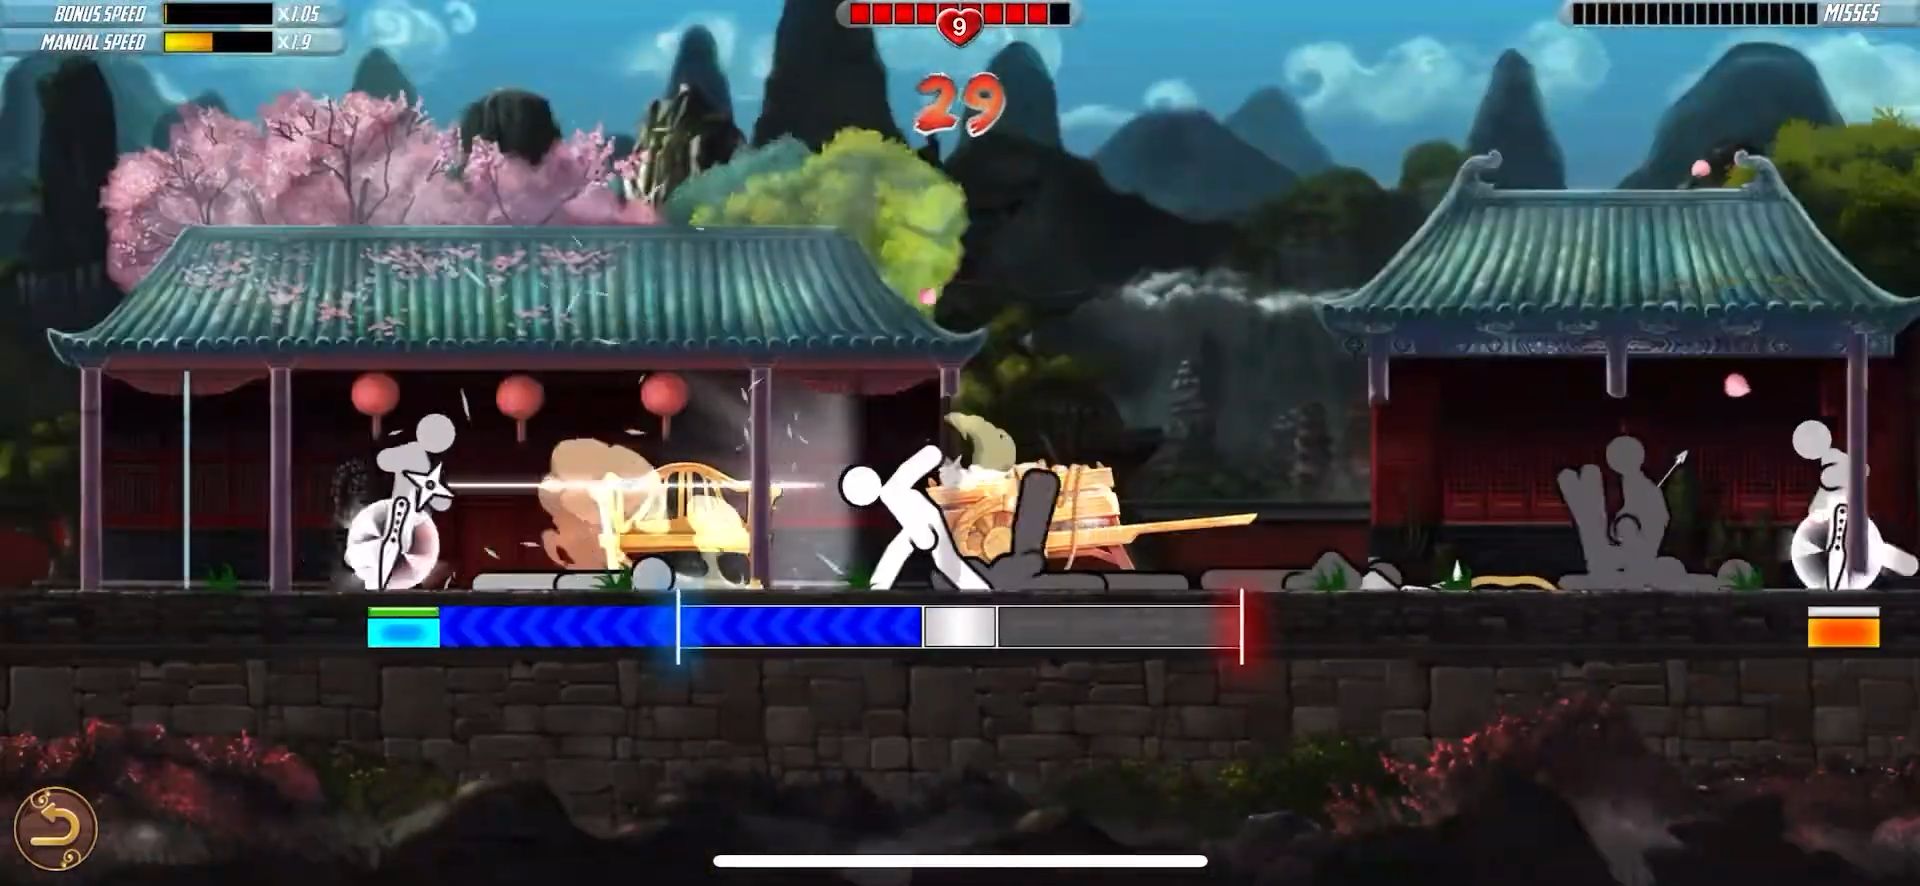 Gameplay of the One Finger Death Punch 2 for Android phone or tablet.